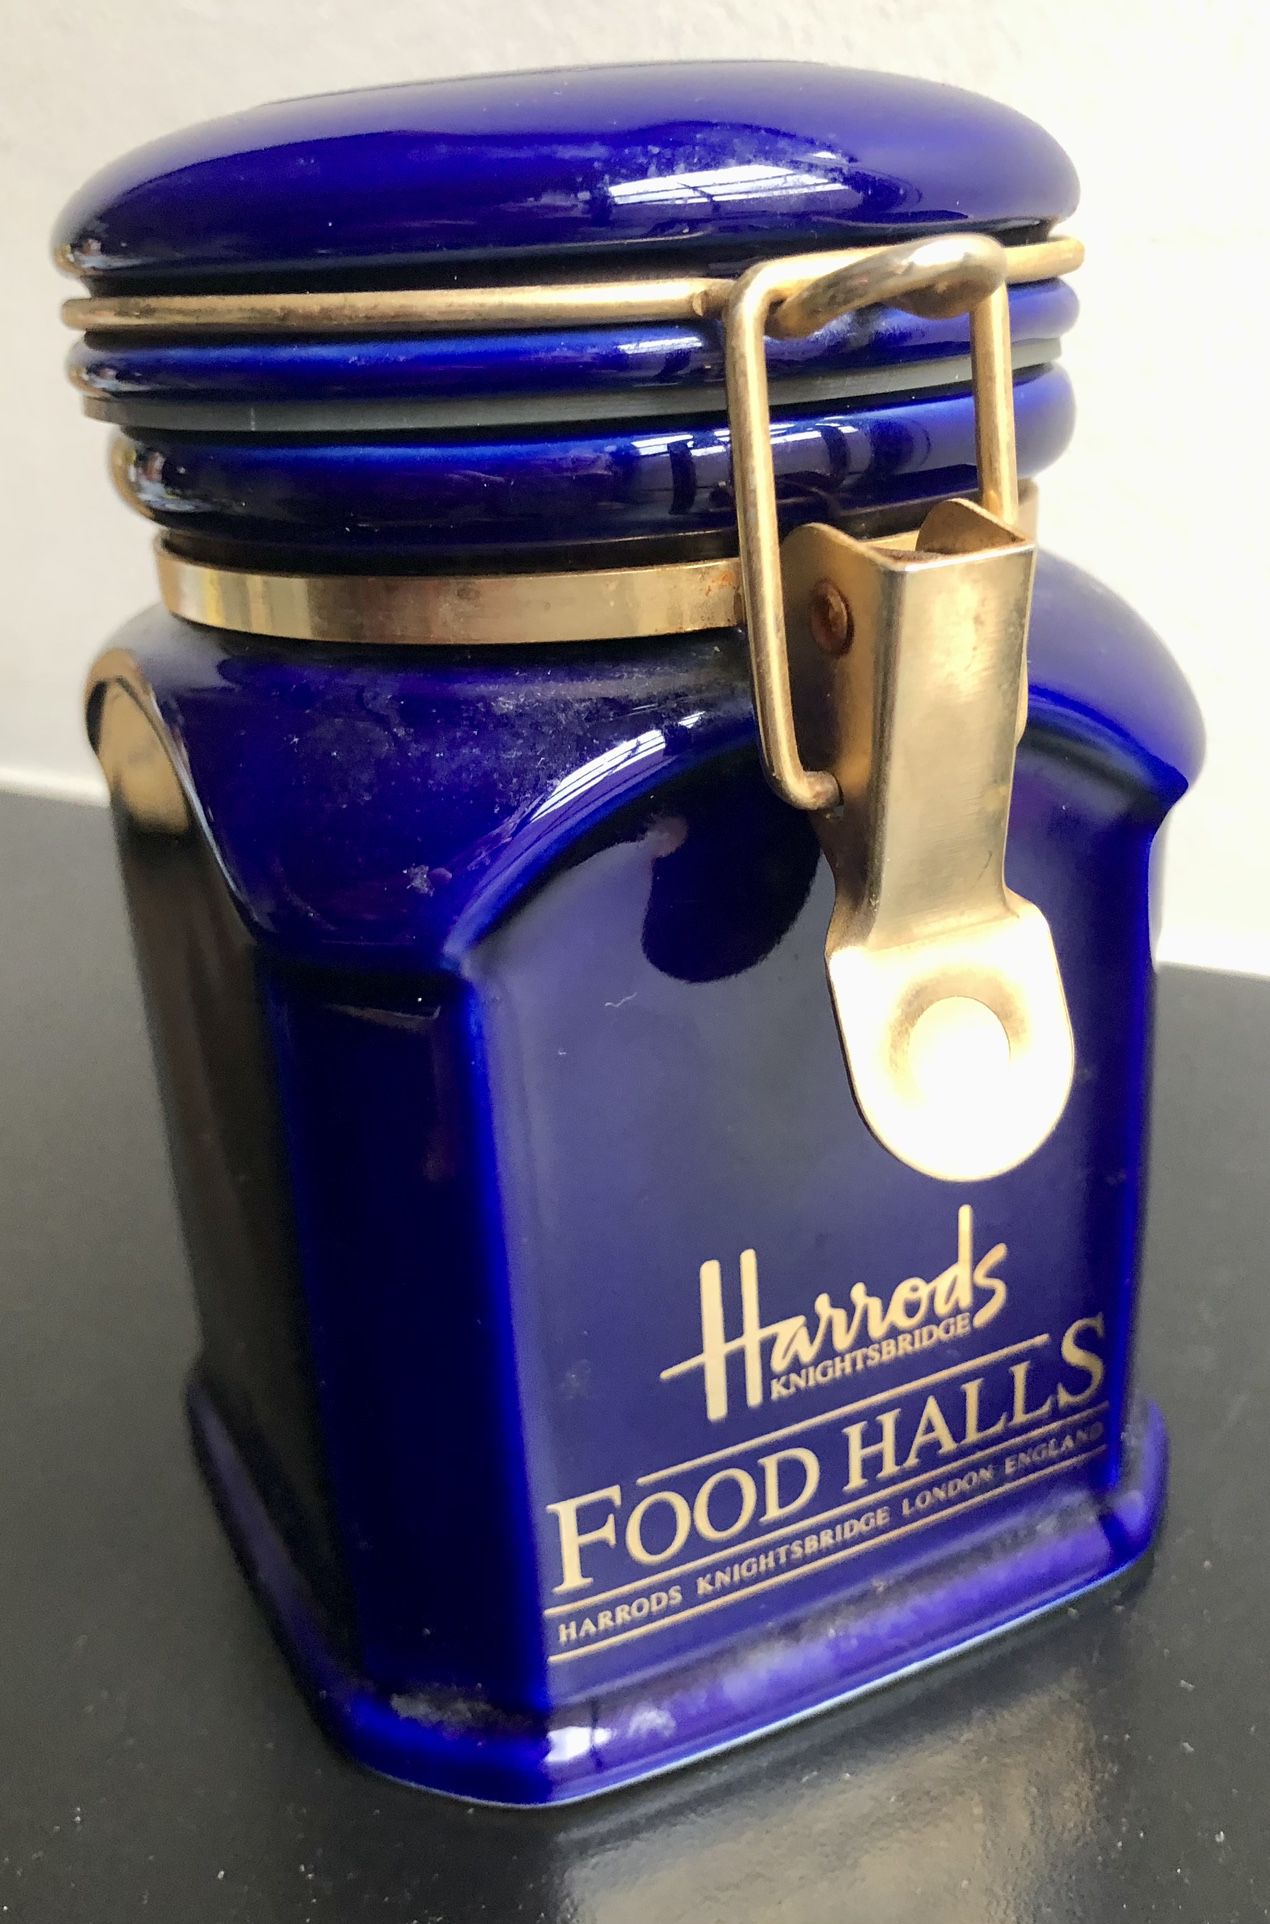 Harrods Knightsbridge Canister with Locking Lid in Blue Food Halls *Empty*